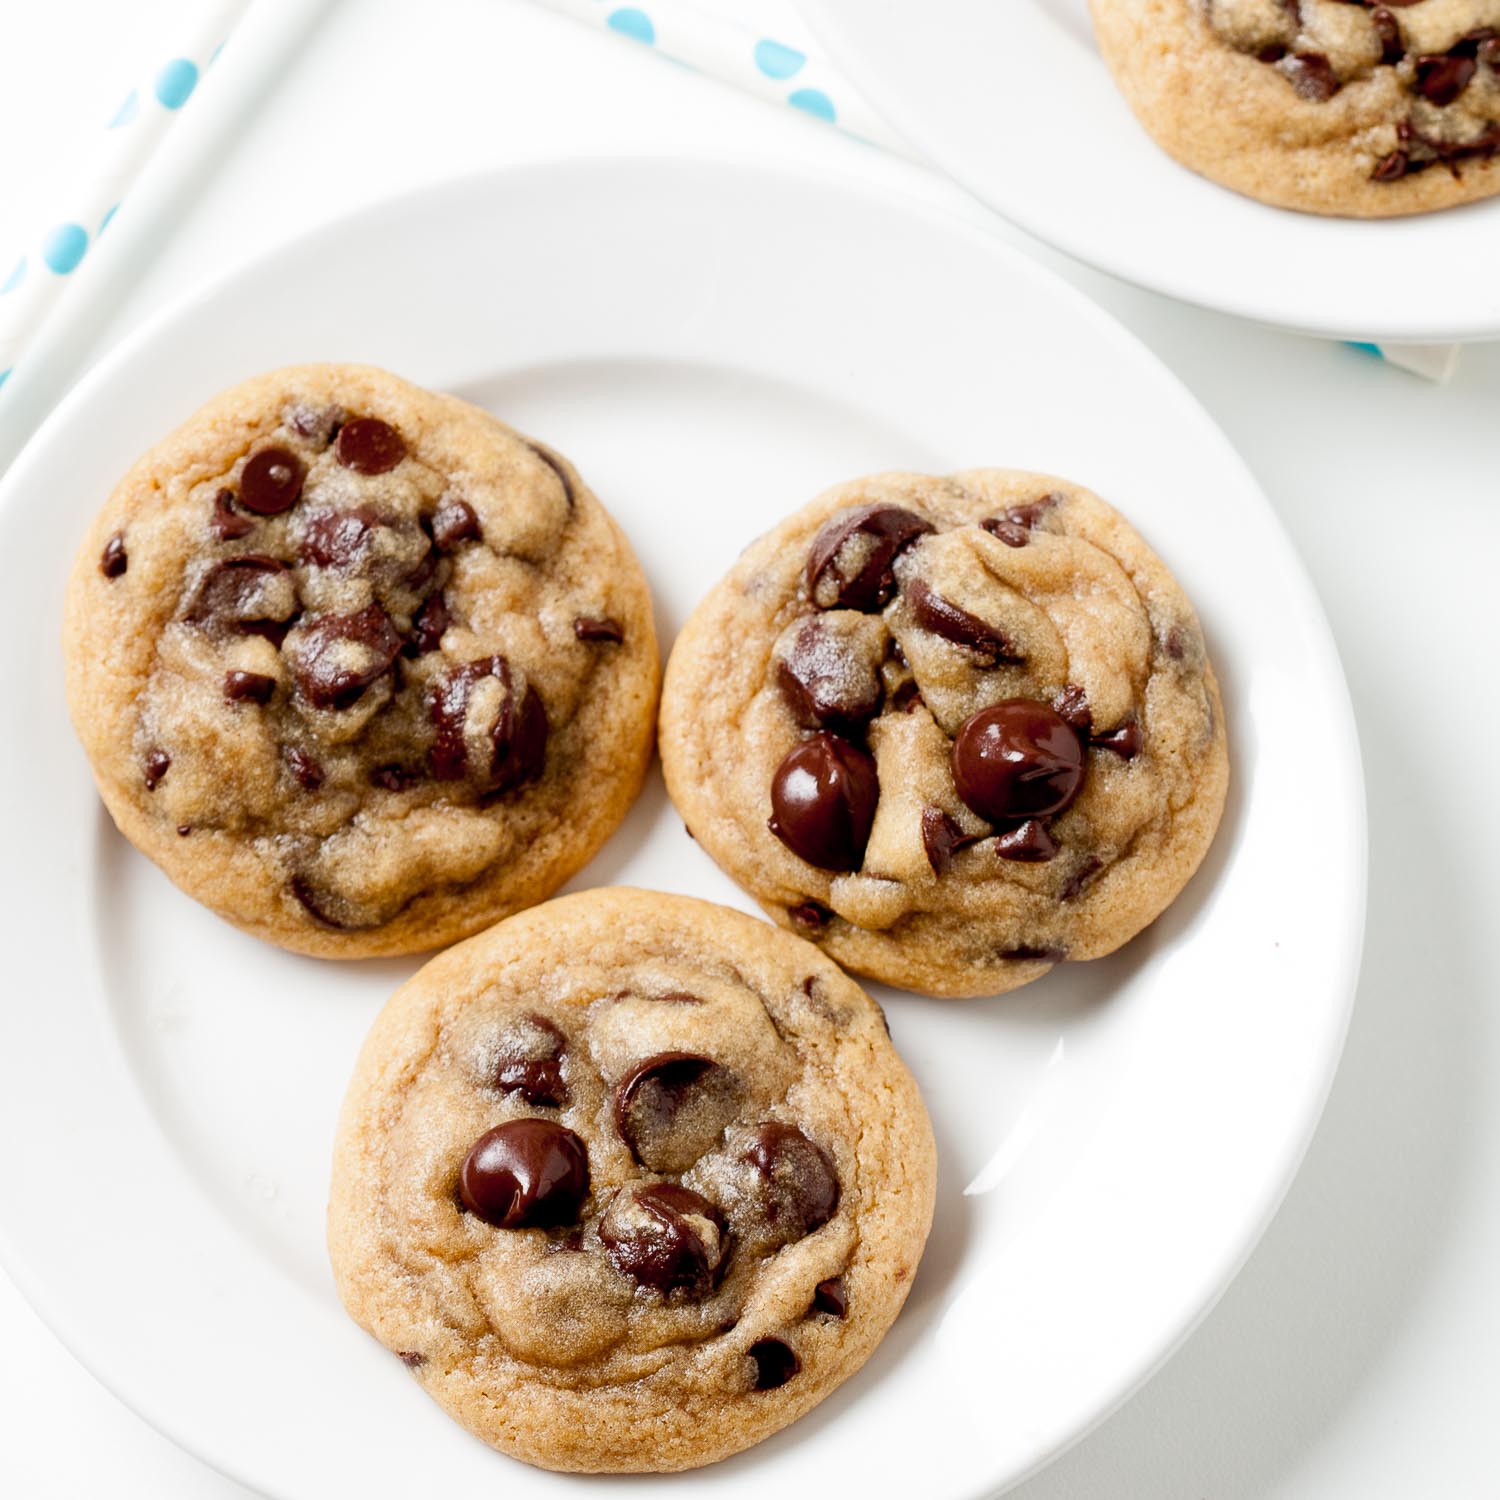 https://www.chewoutloud.com/wp-content/uploads/2022/10/Forever-Chewy-Chocolate-Chip-Cookies-Square.jpg